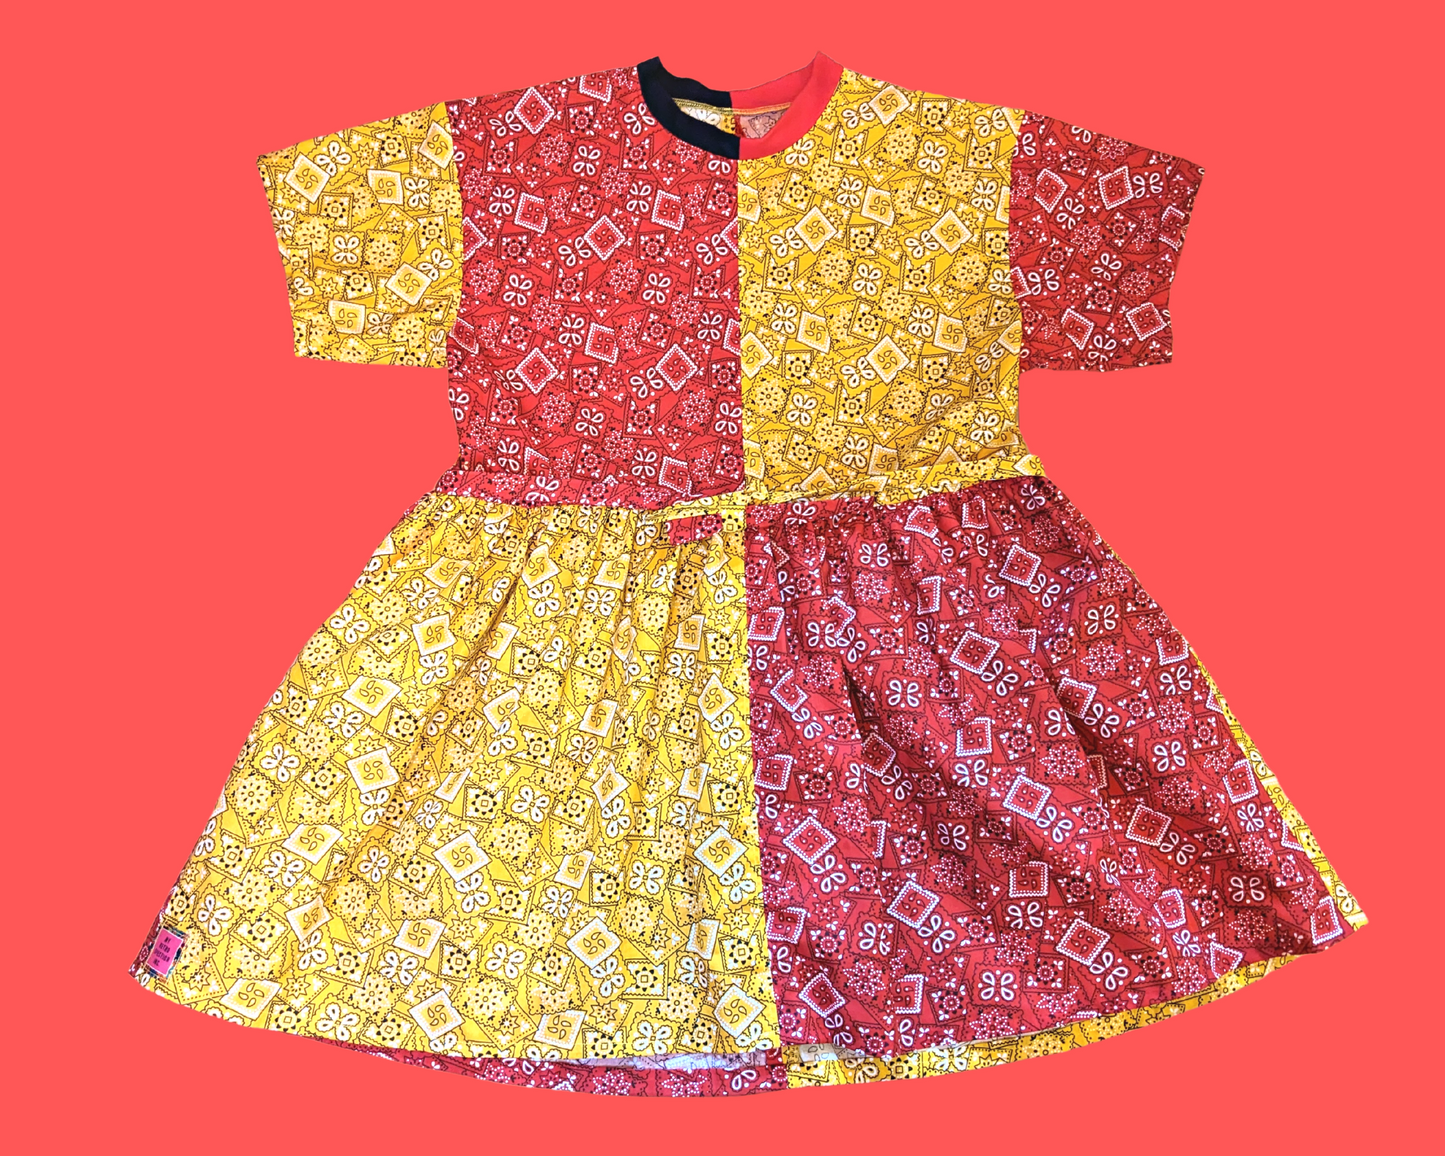 Handmade, Upcycled Mix-Matched Yellow and Red Paisley, Bandana Styled Fabric T-Shirt Dress Fits S-M-L-XL